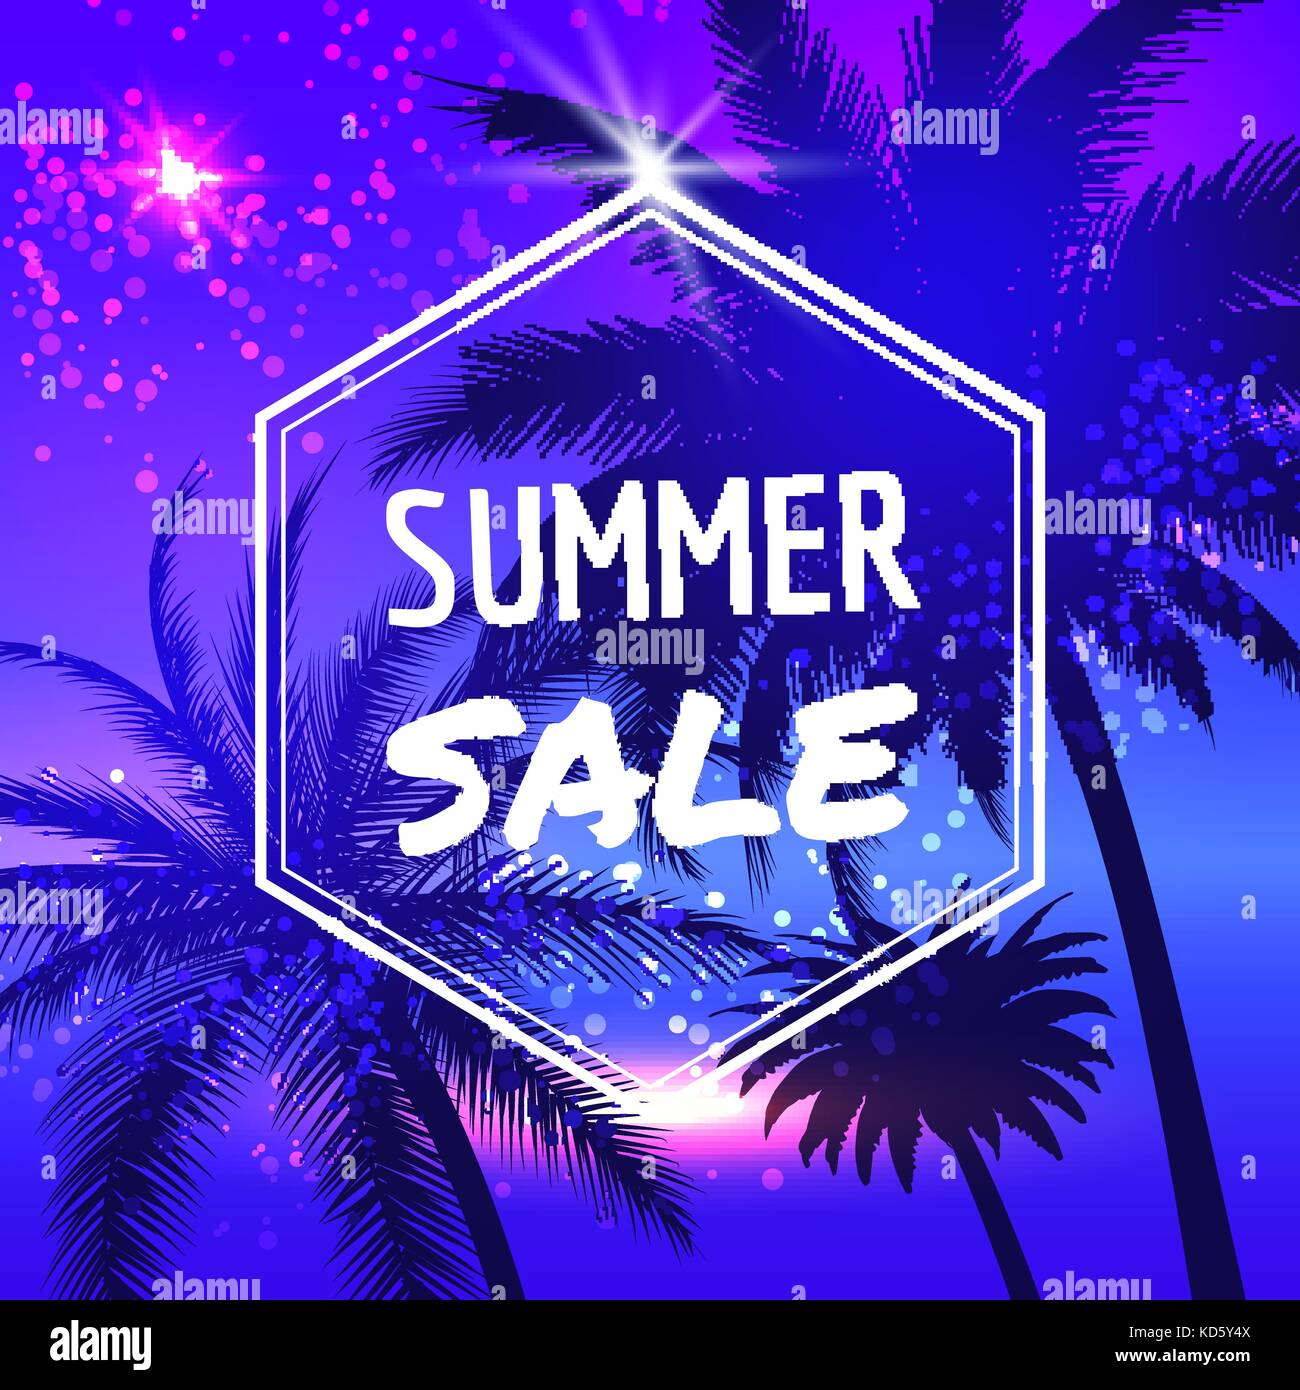 Summer sale poster with palm trees Stock Vector